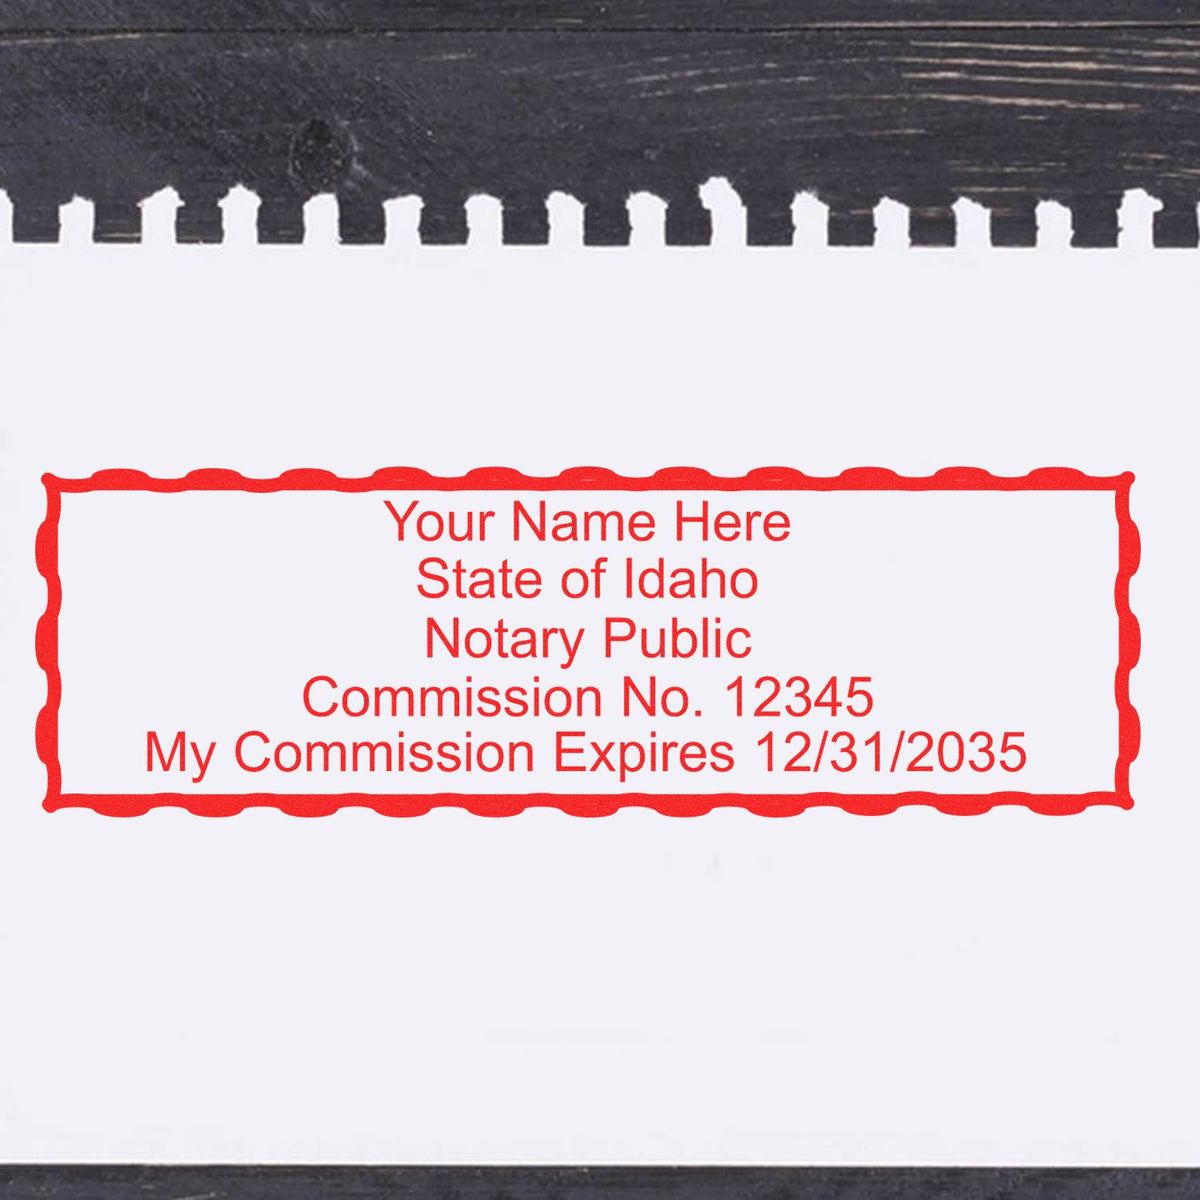 A stamped impression of the Wooden Handle Idaho Rectangular Notary Public Stamp in this stylish lifestyle photo, setting the tone for a unique and personalized product.